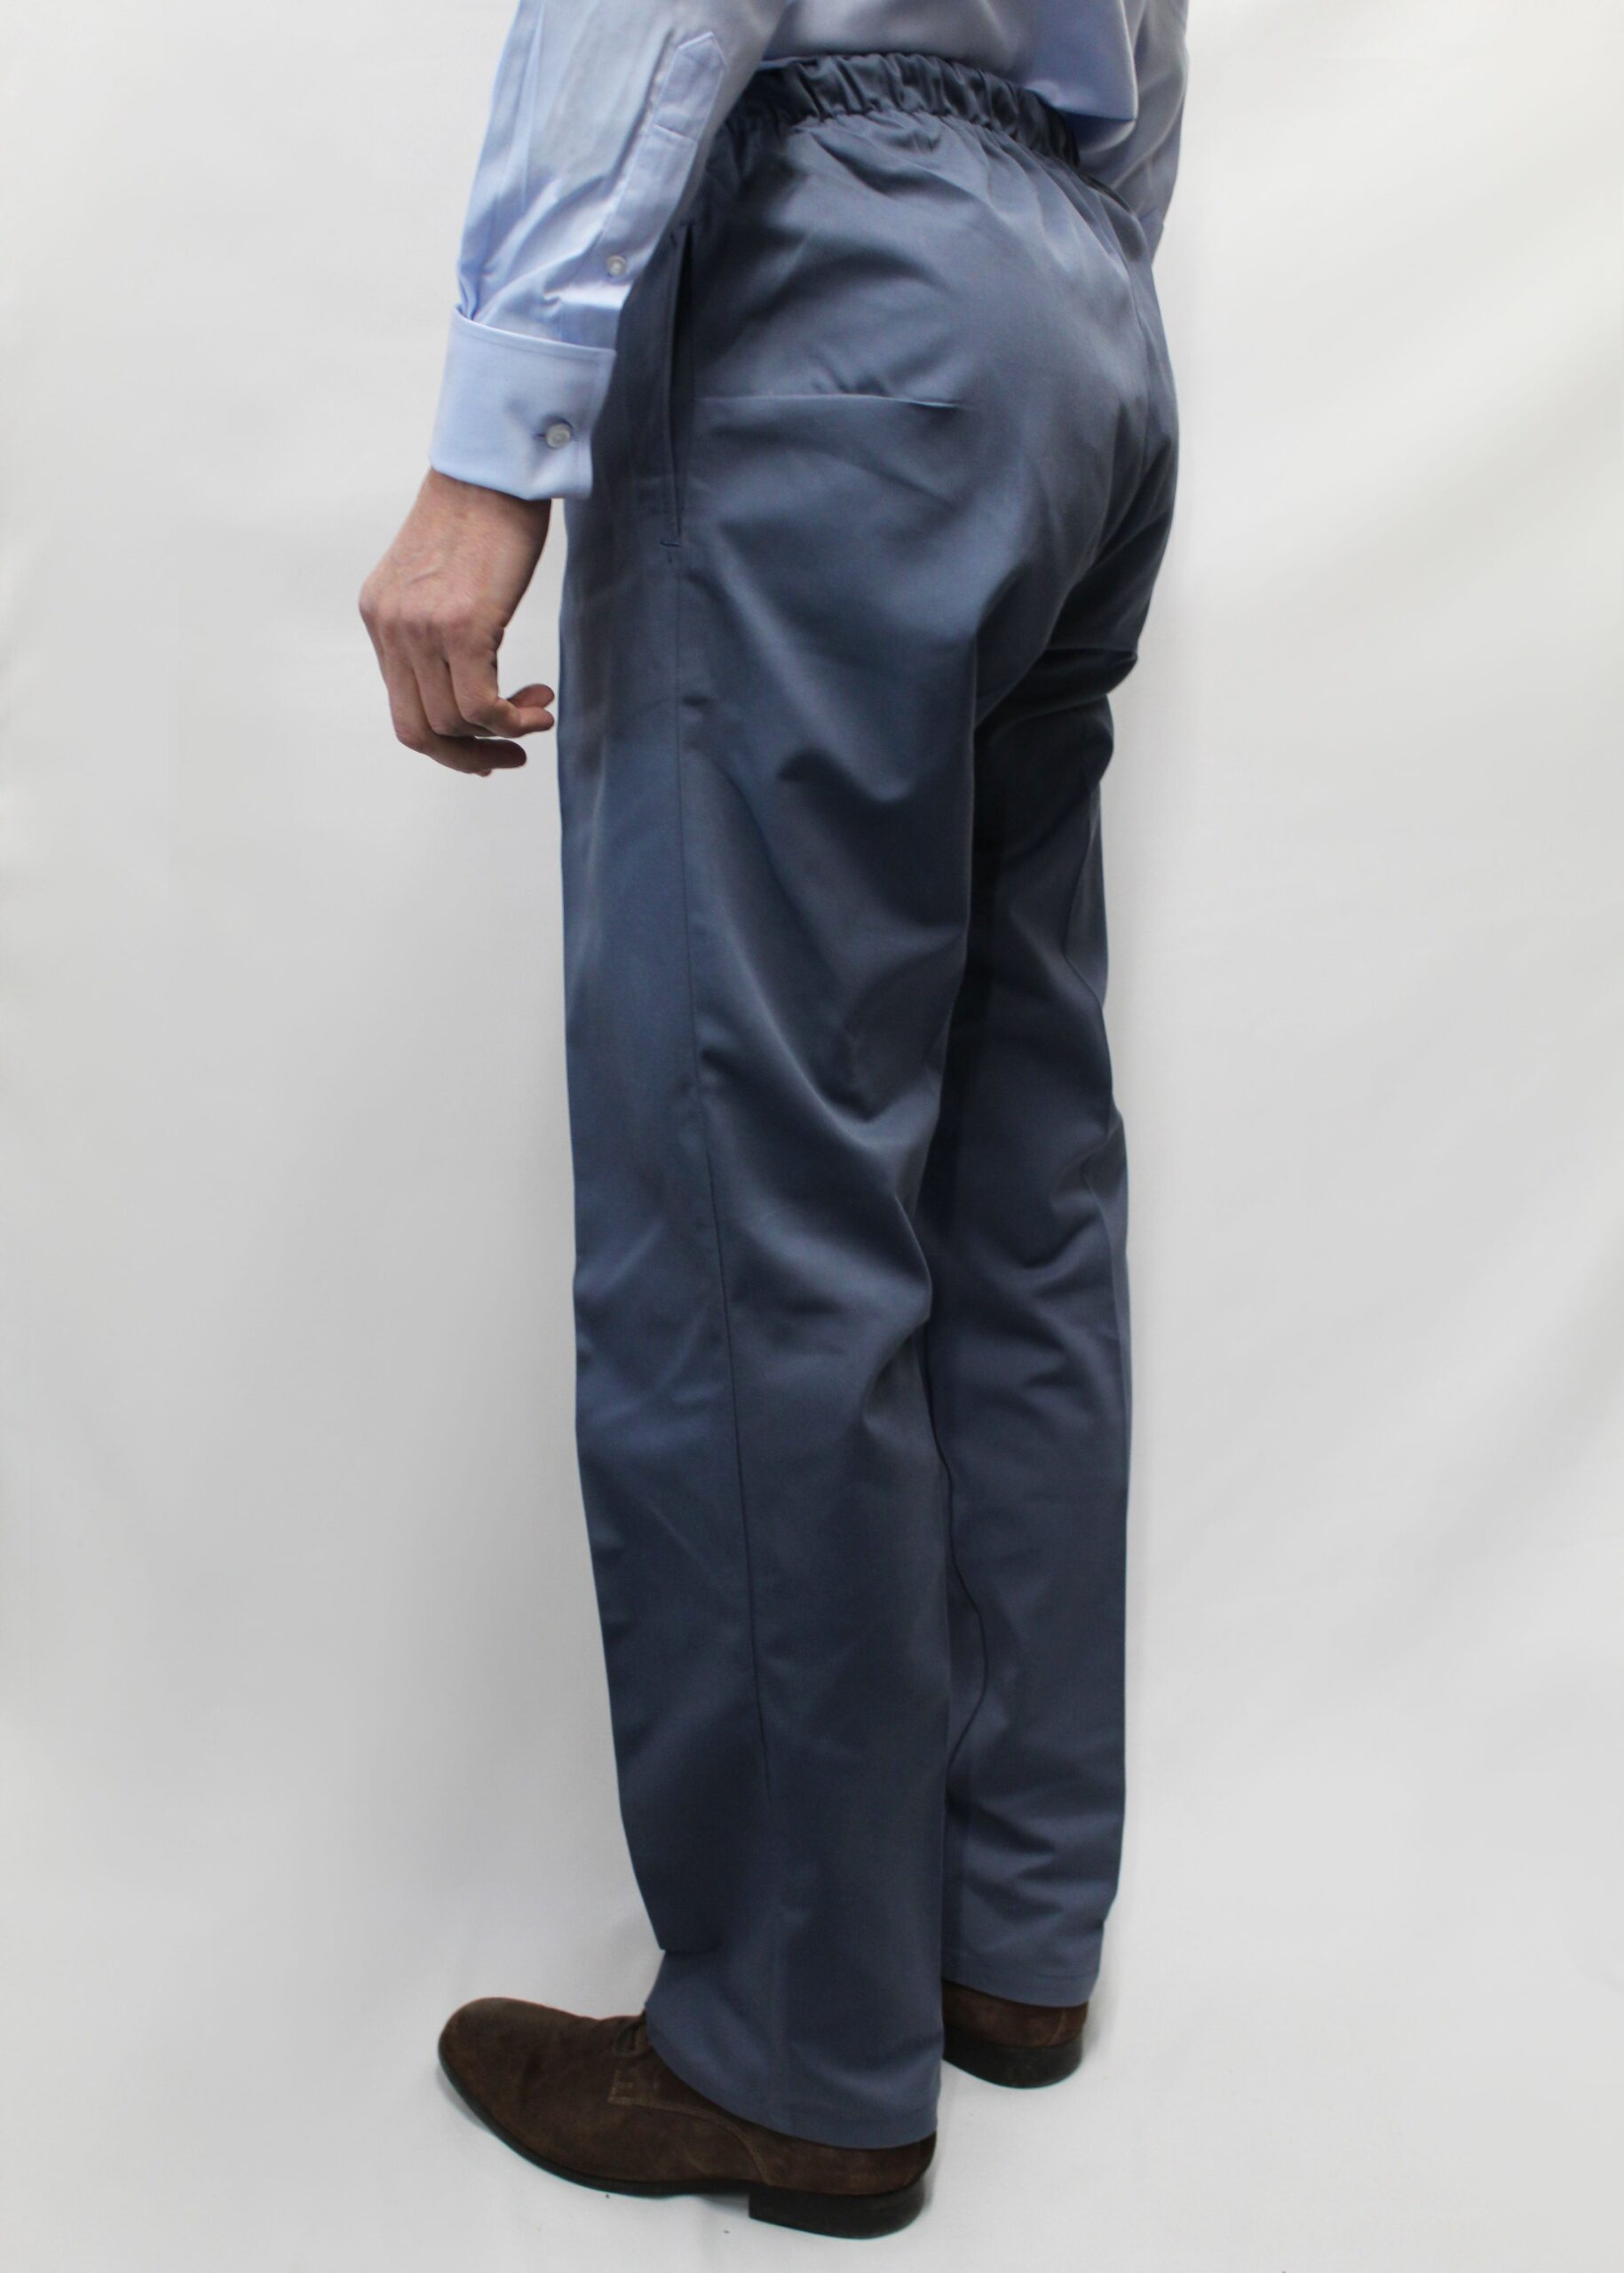 Men's Lightweight Elastic Waist Pull-On Chino Style Trousers